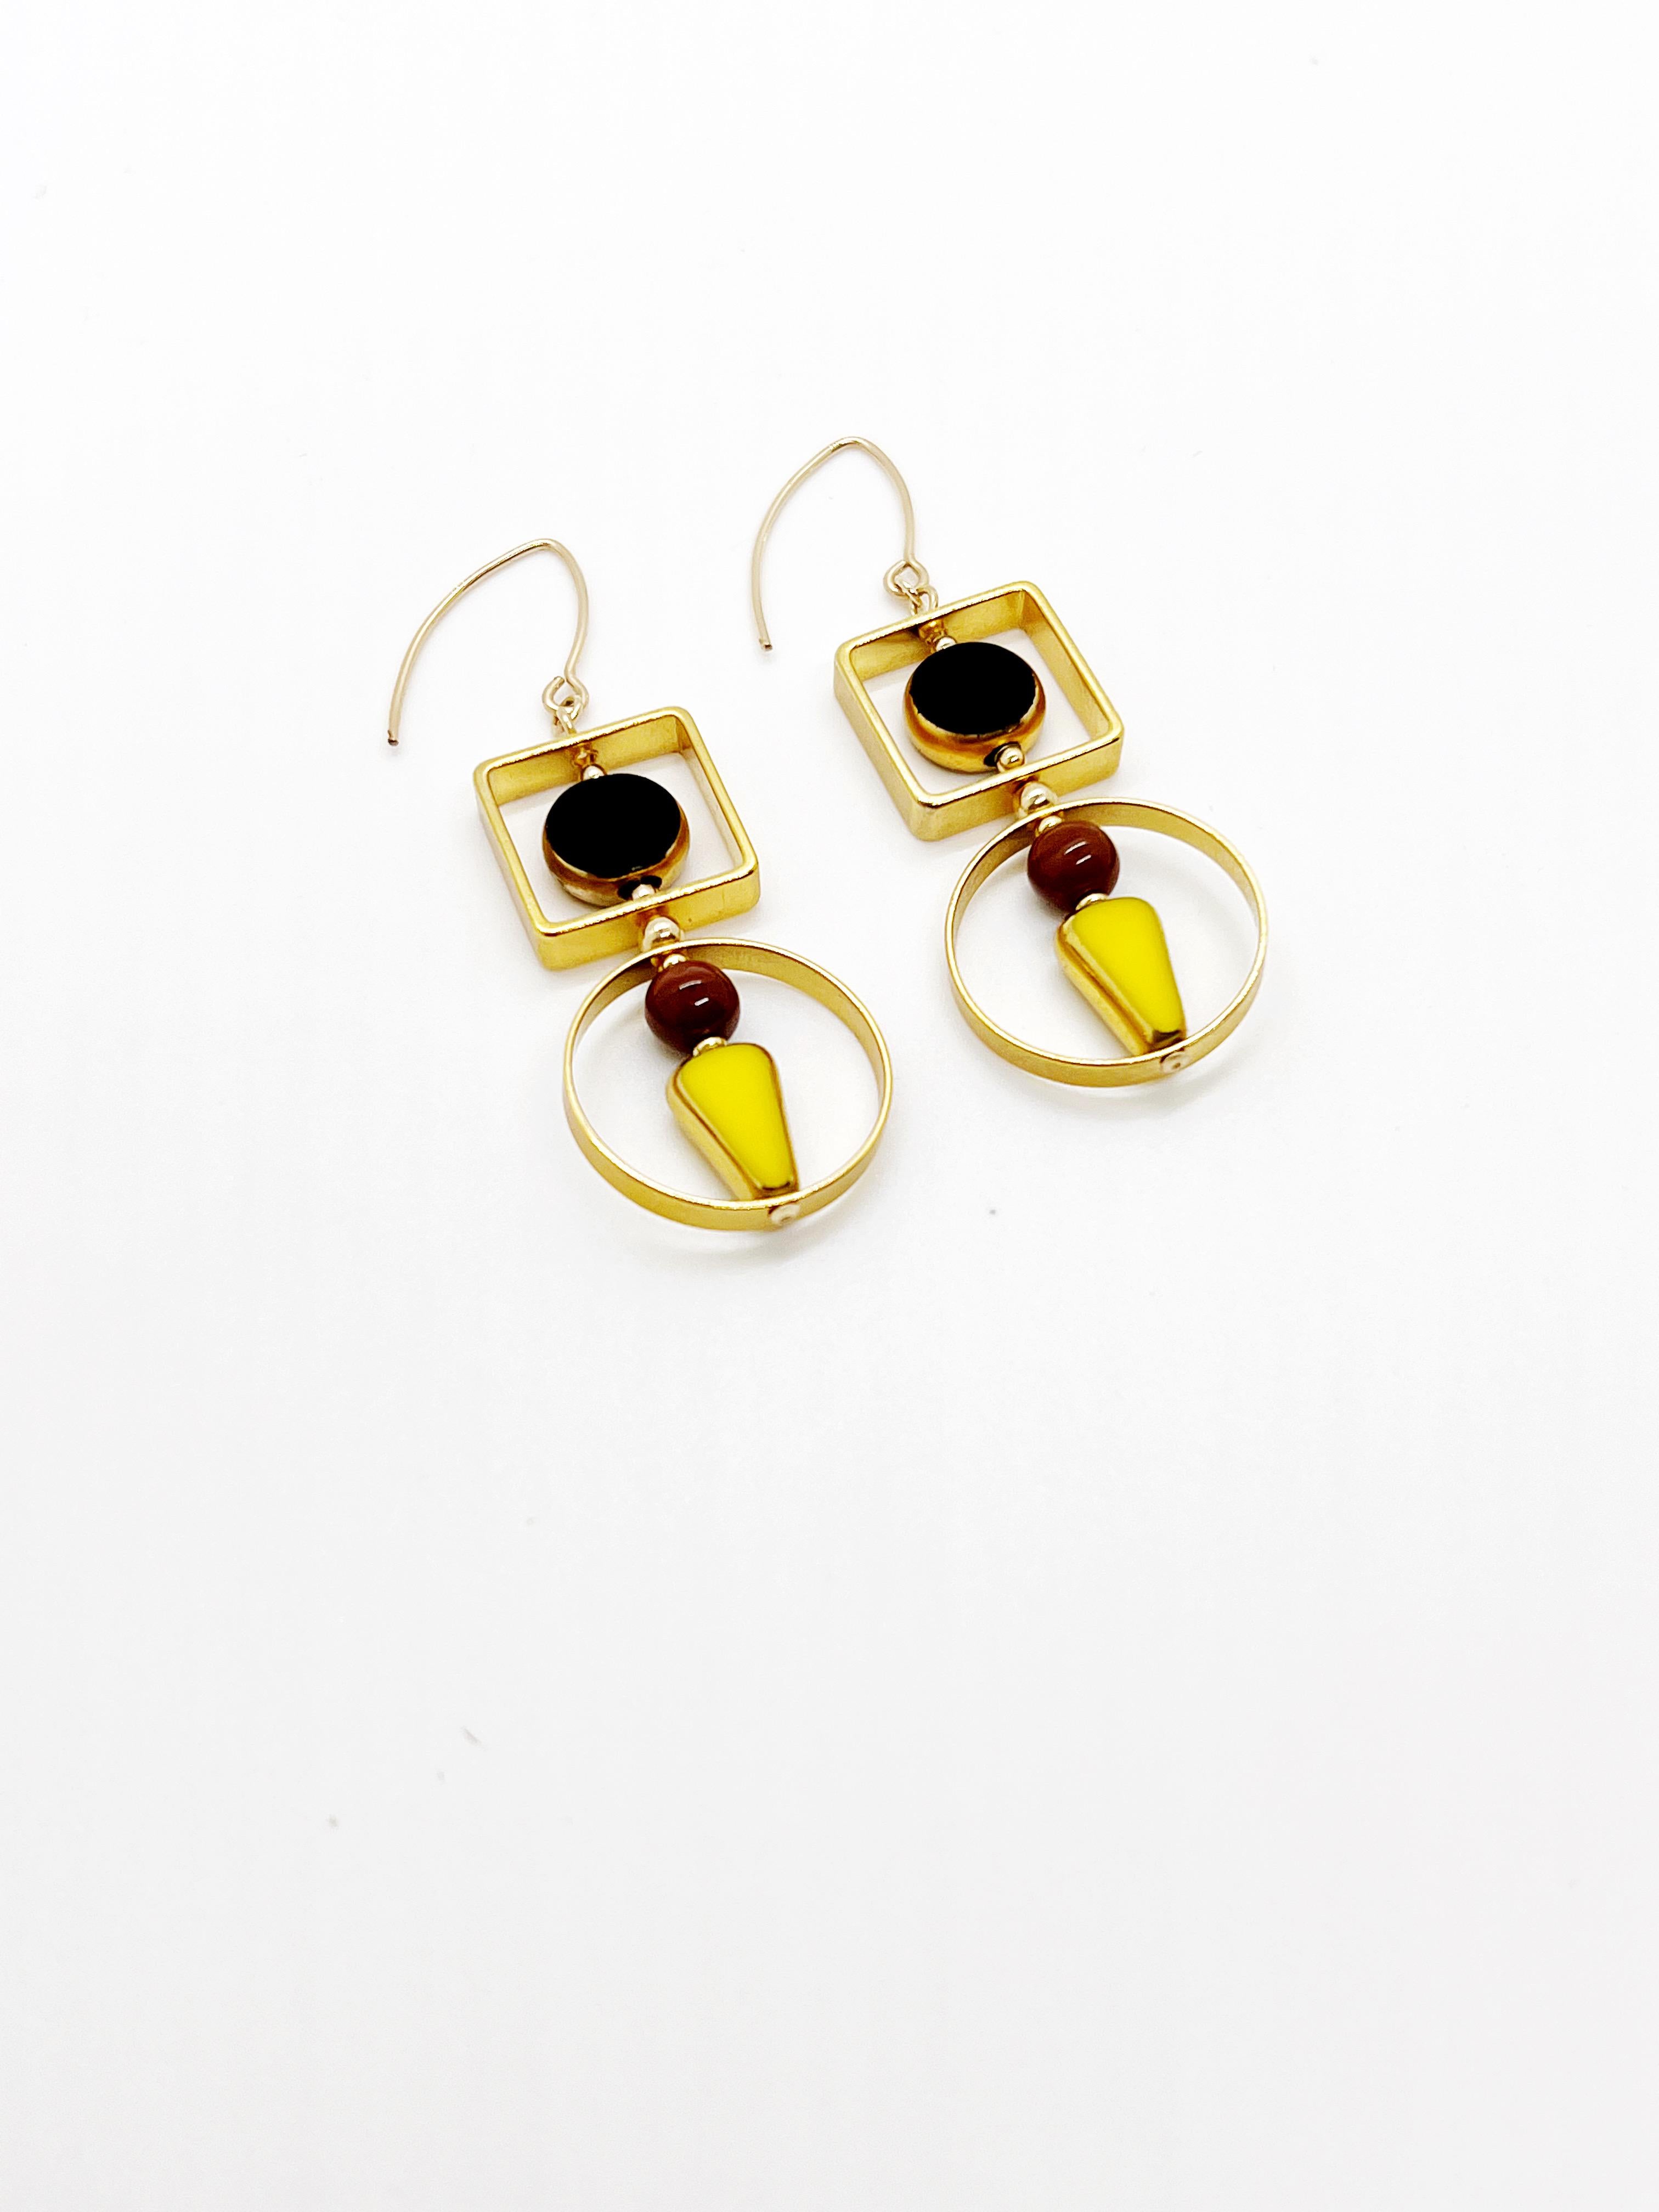 The earrings are light weight and are made to rotate and reposition with movement.

The earrings consist of a black circle and yellow triangle shaped beads. They are new old stock vintage German glass beads that are framed with 24K gold. The beads